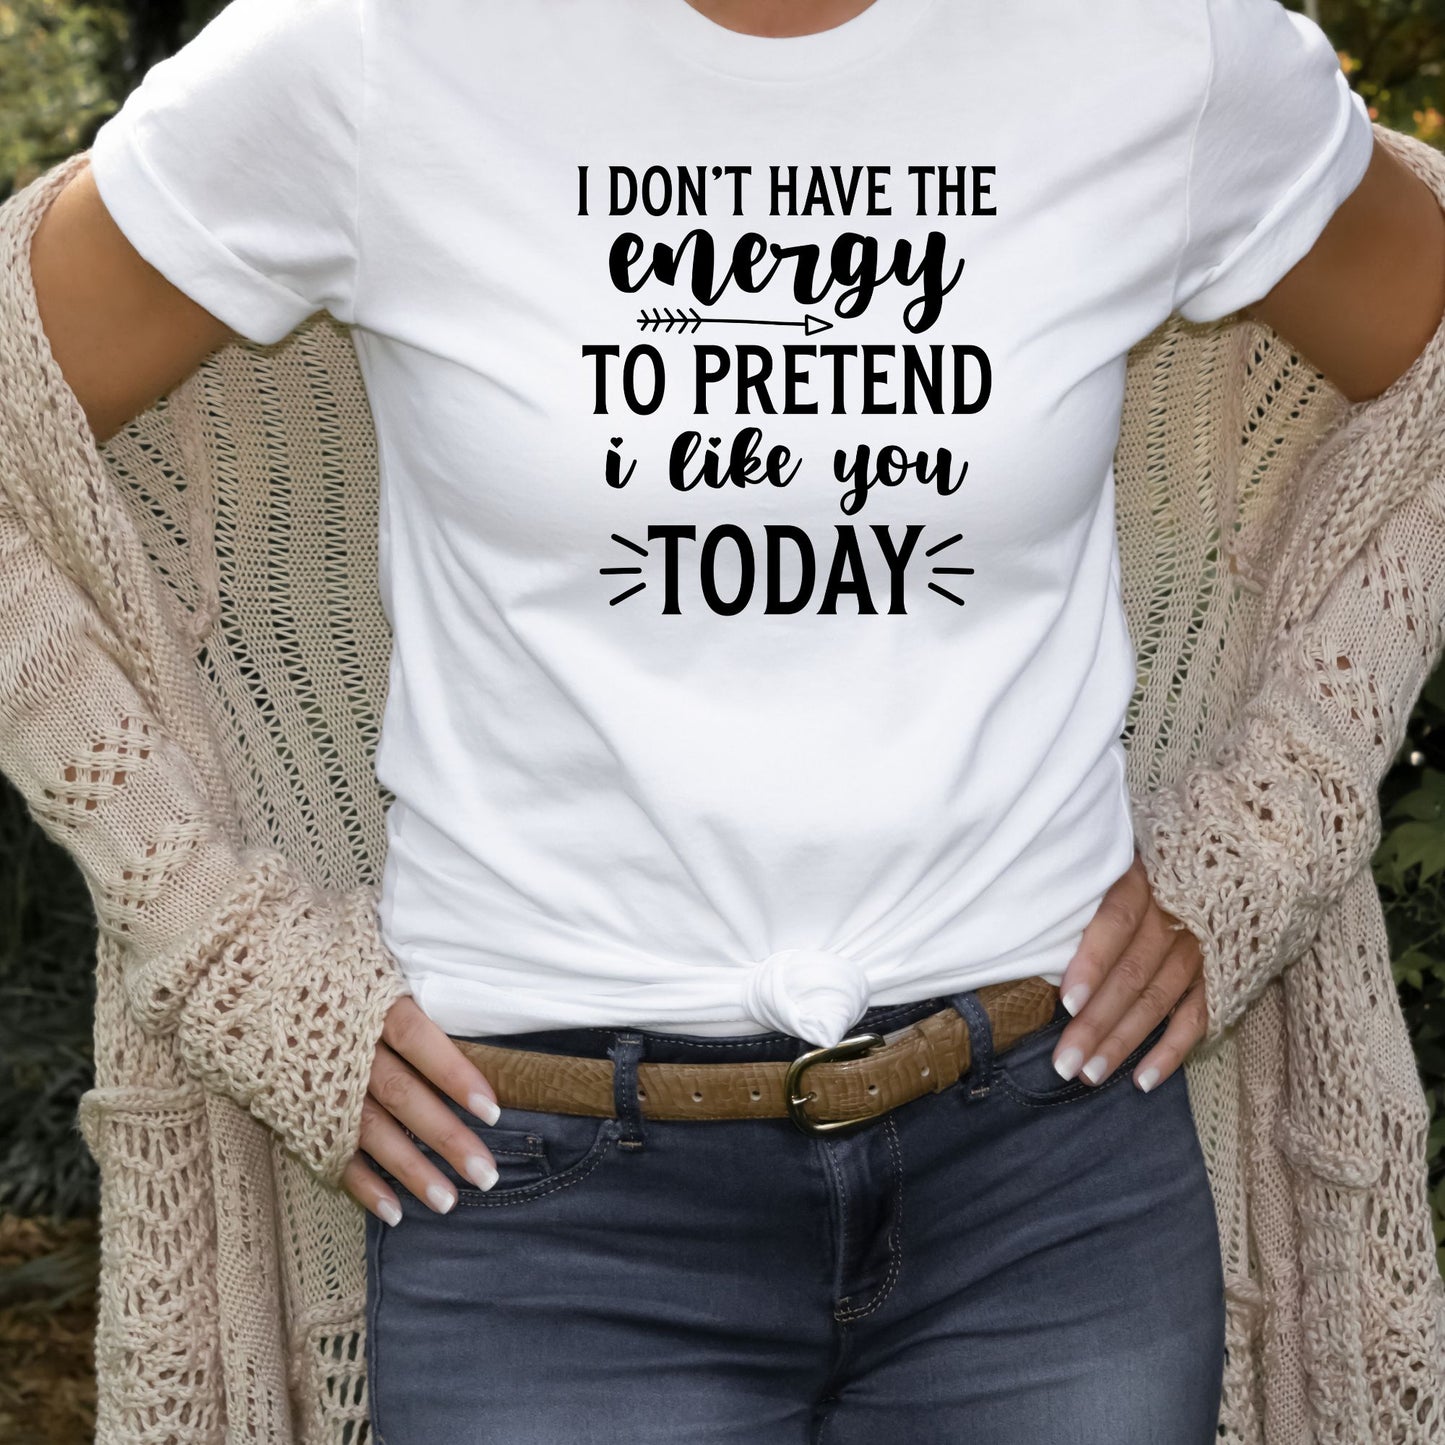 Honesty is the Best Policy: I Don't Like You Shirt